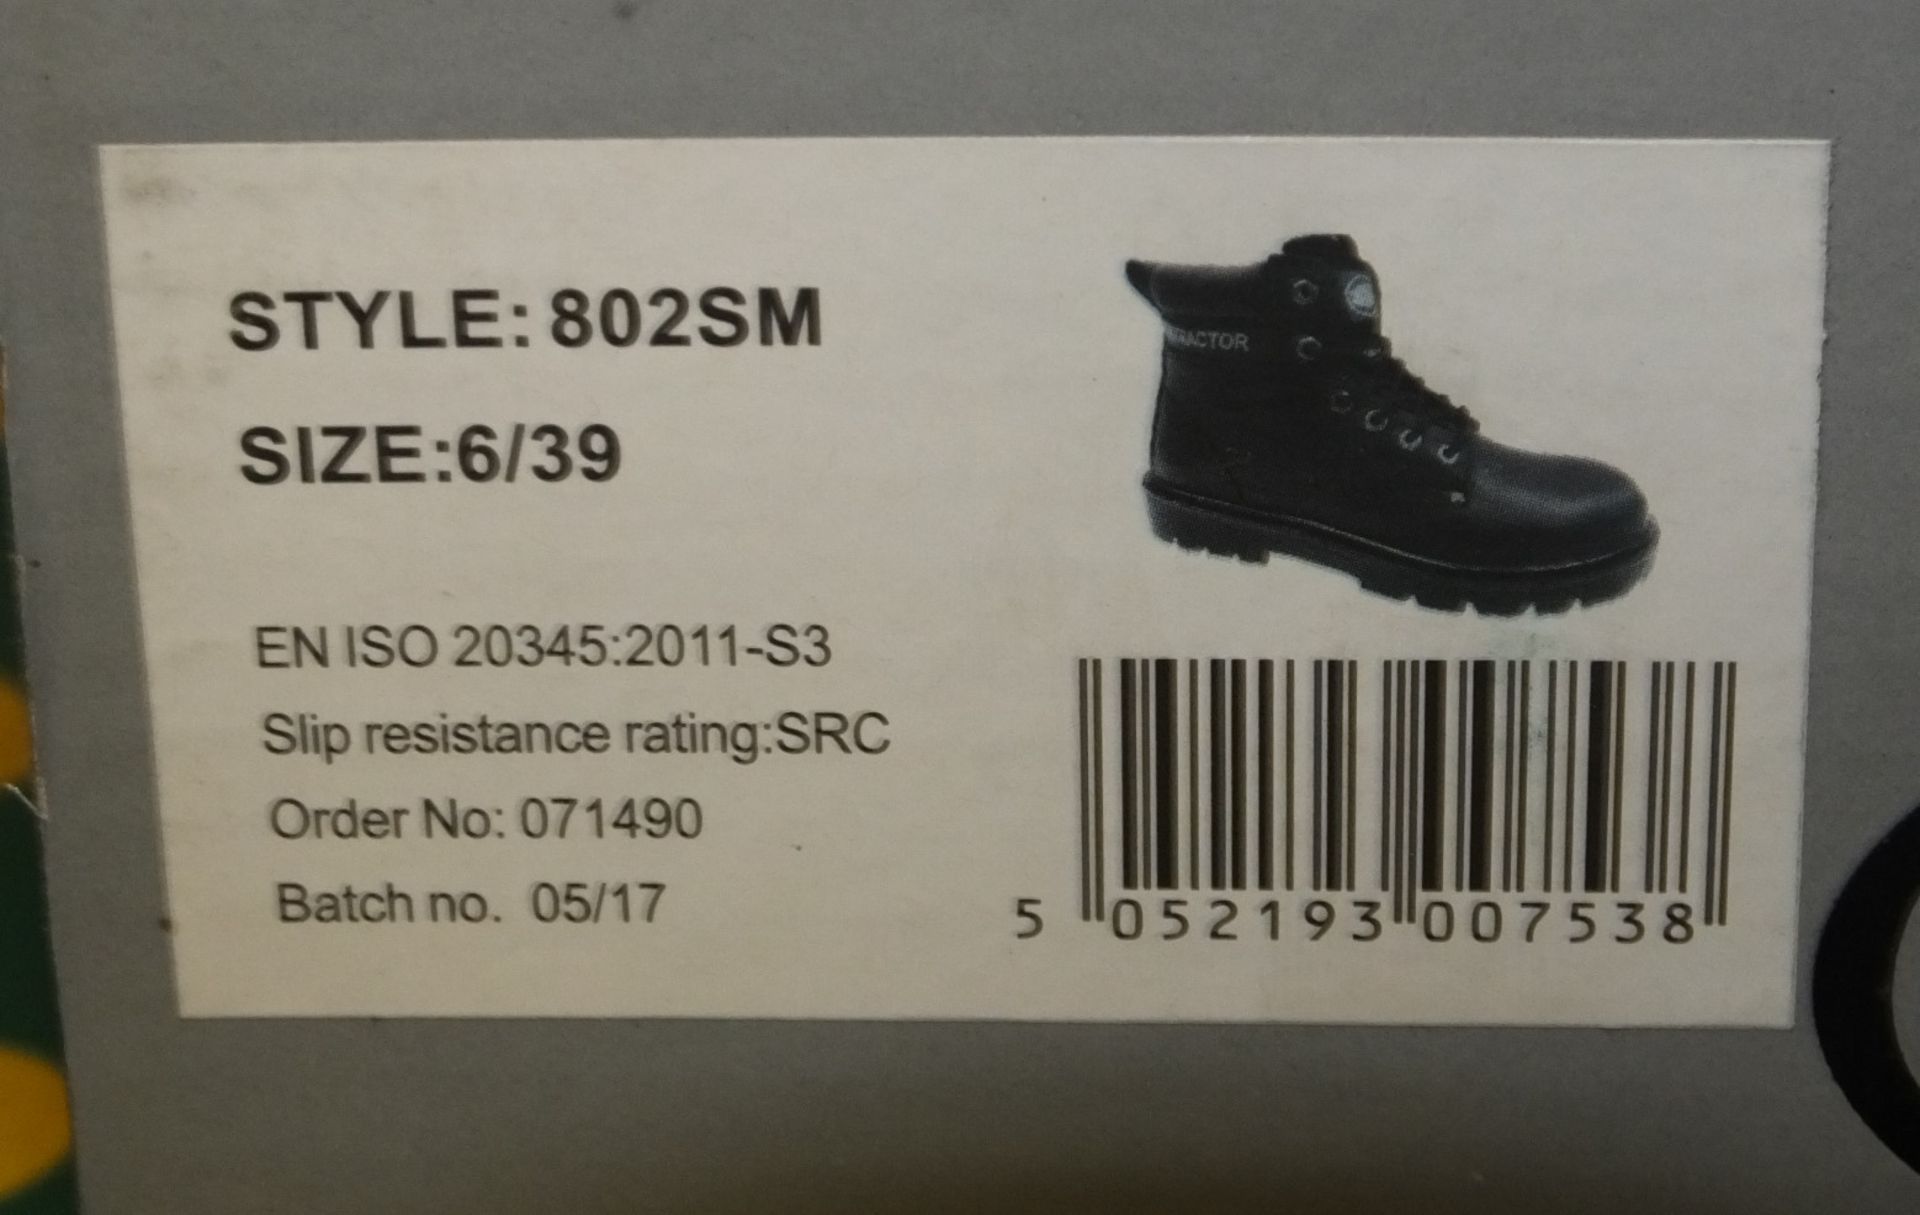 Safety boots - Contractor safety boot 802SM - UK6 / 39 Euro - Image 2 of 2